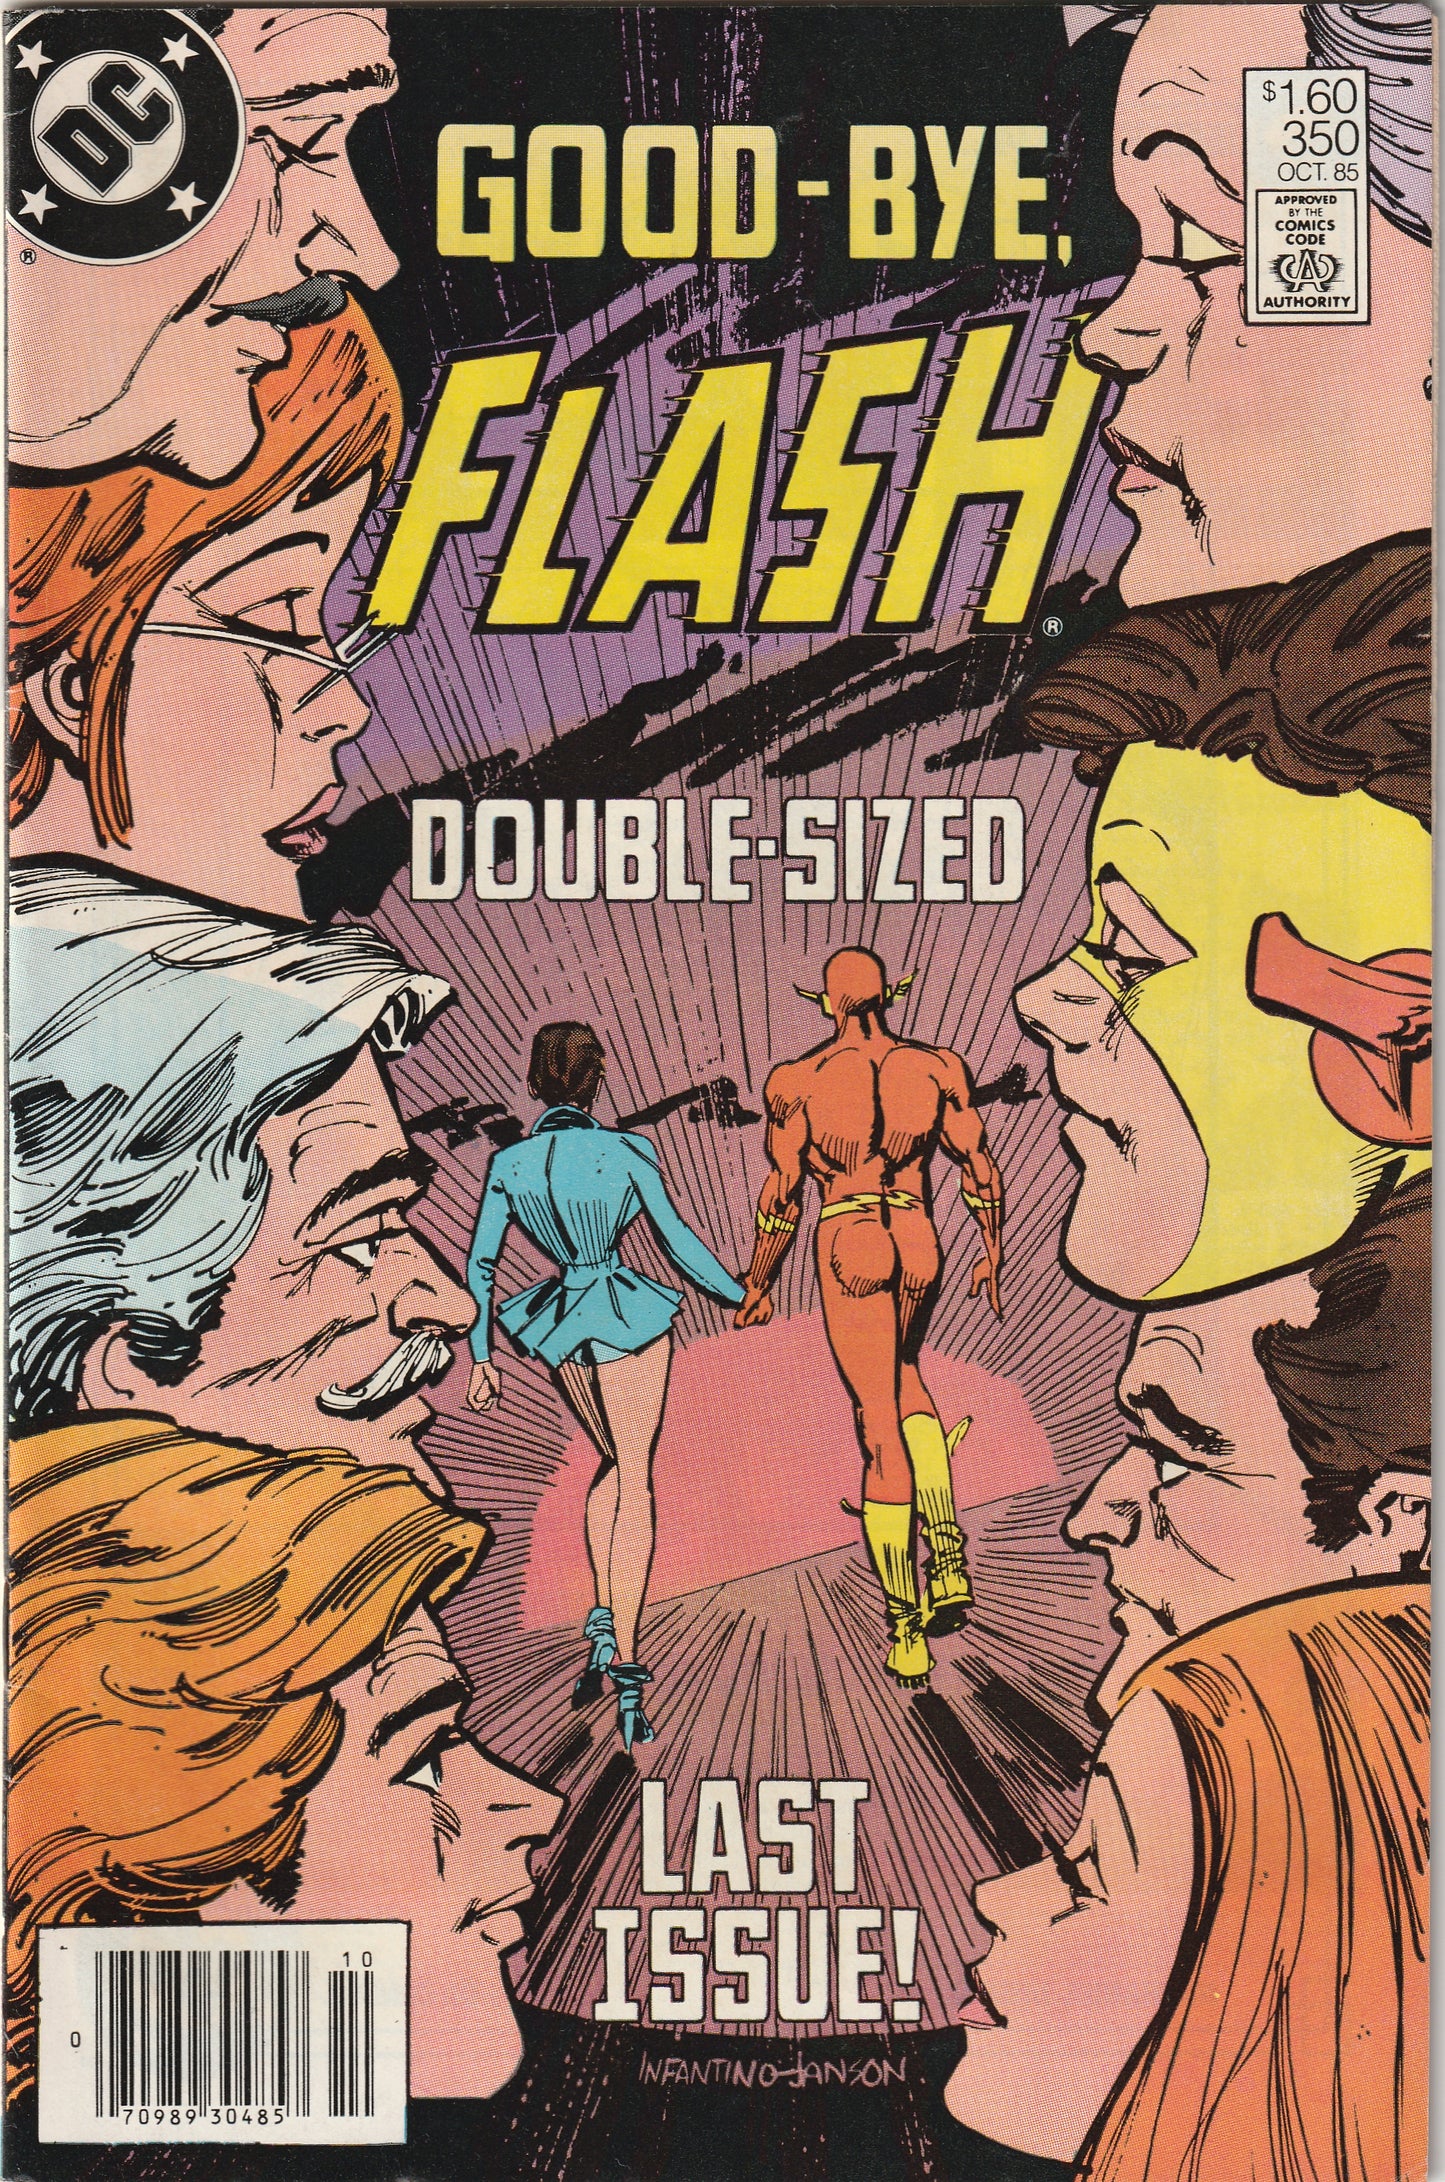 Flash #350 (1985) - Final issue - Canadian Price Variant ($1.60)